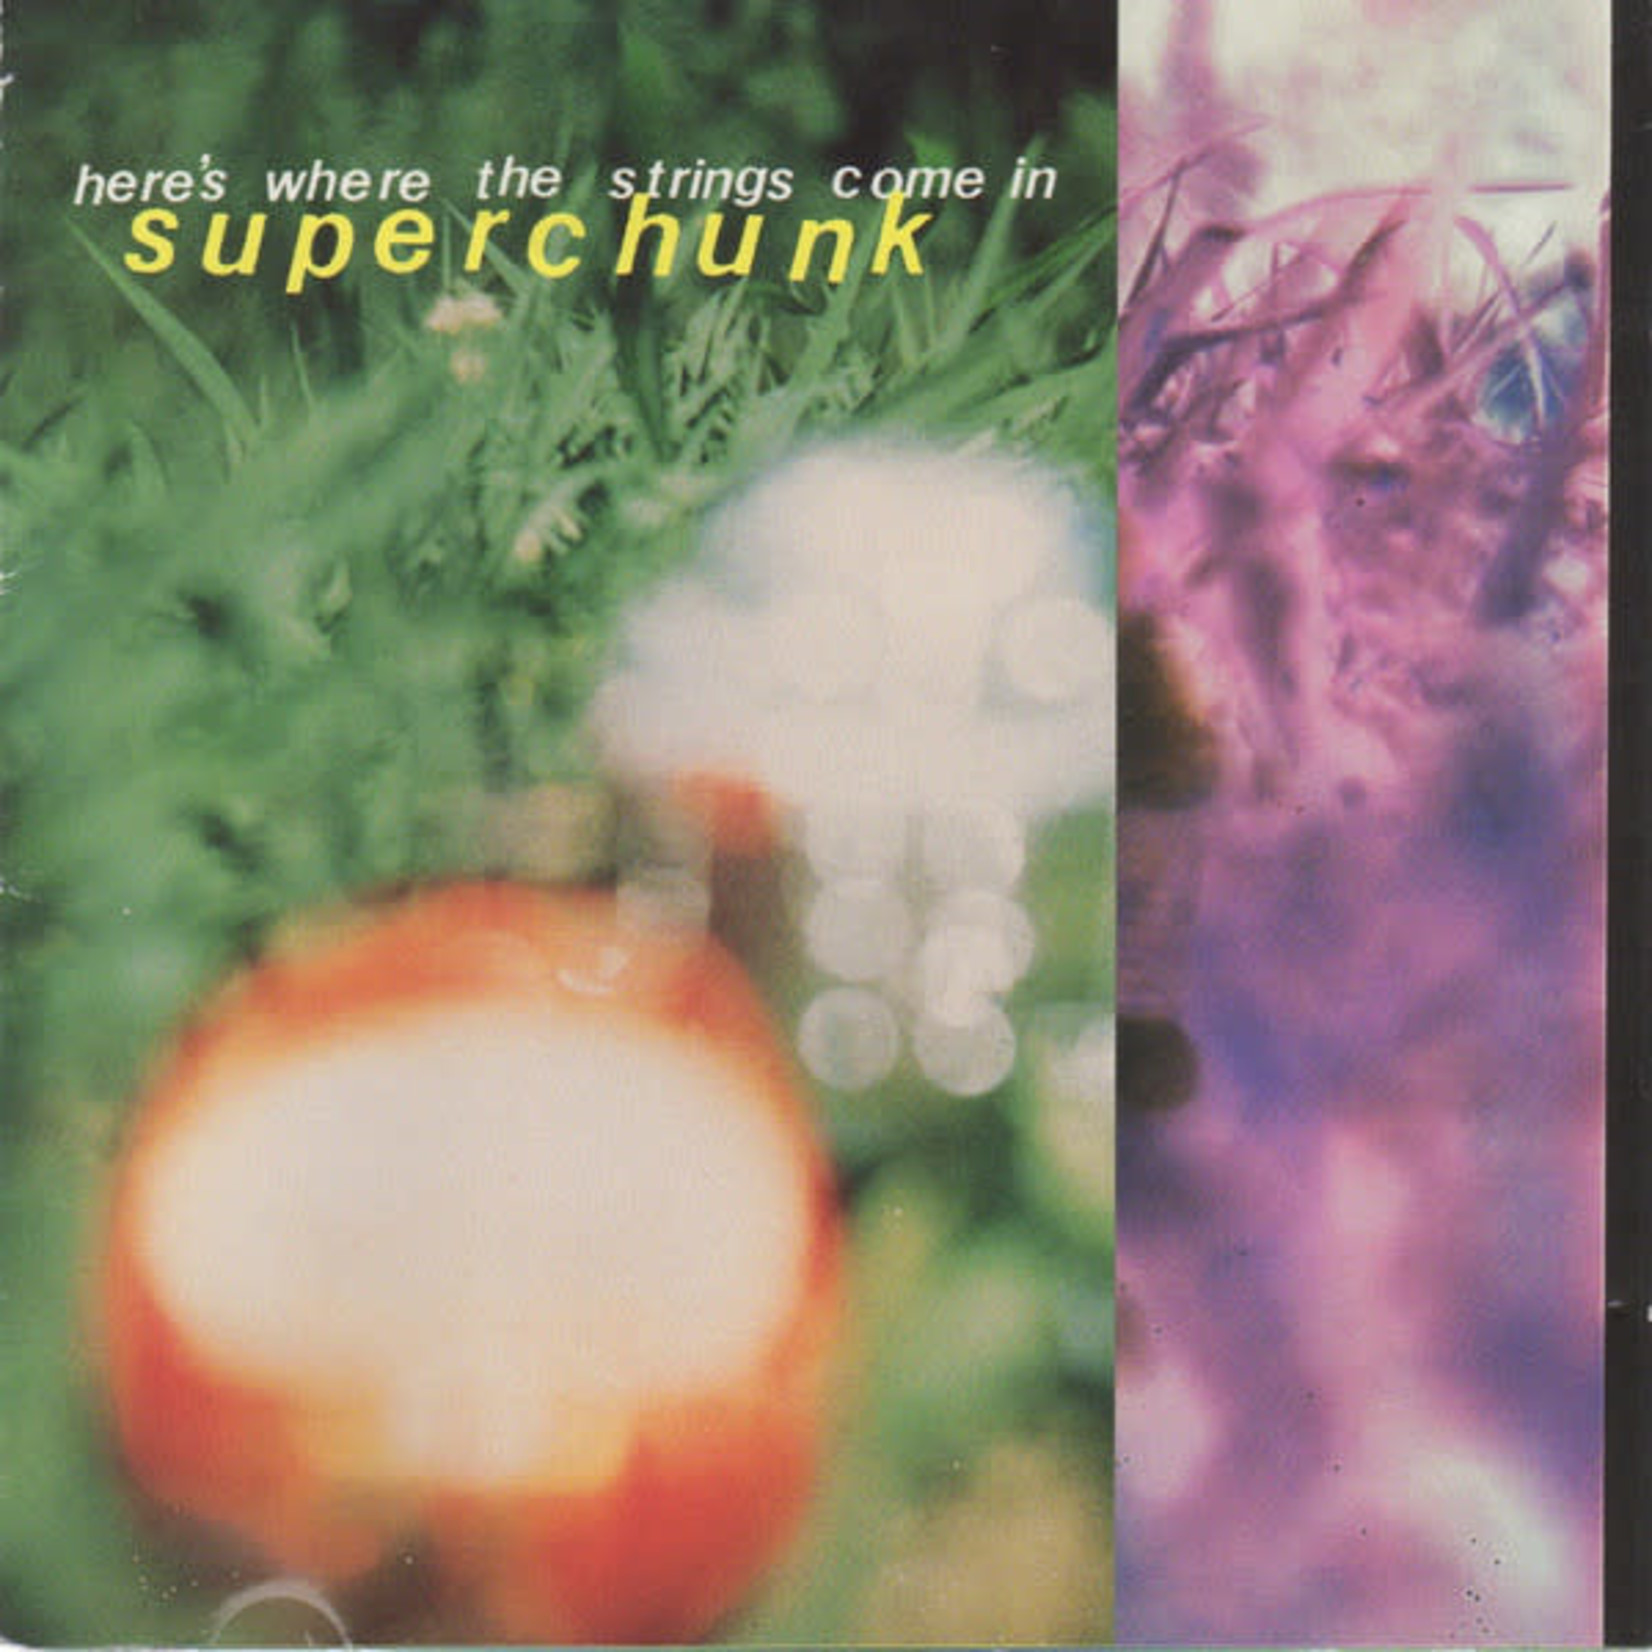 [New] Superchunk - Here's Where the Strings Come in